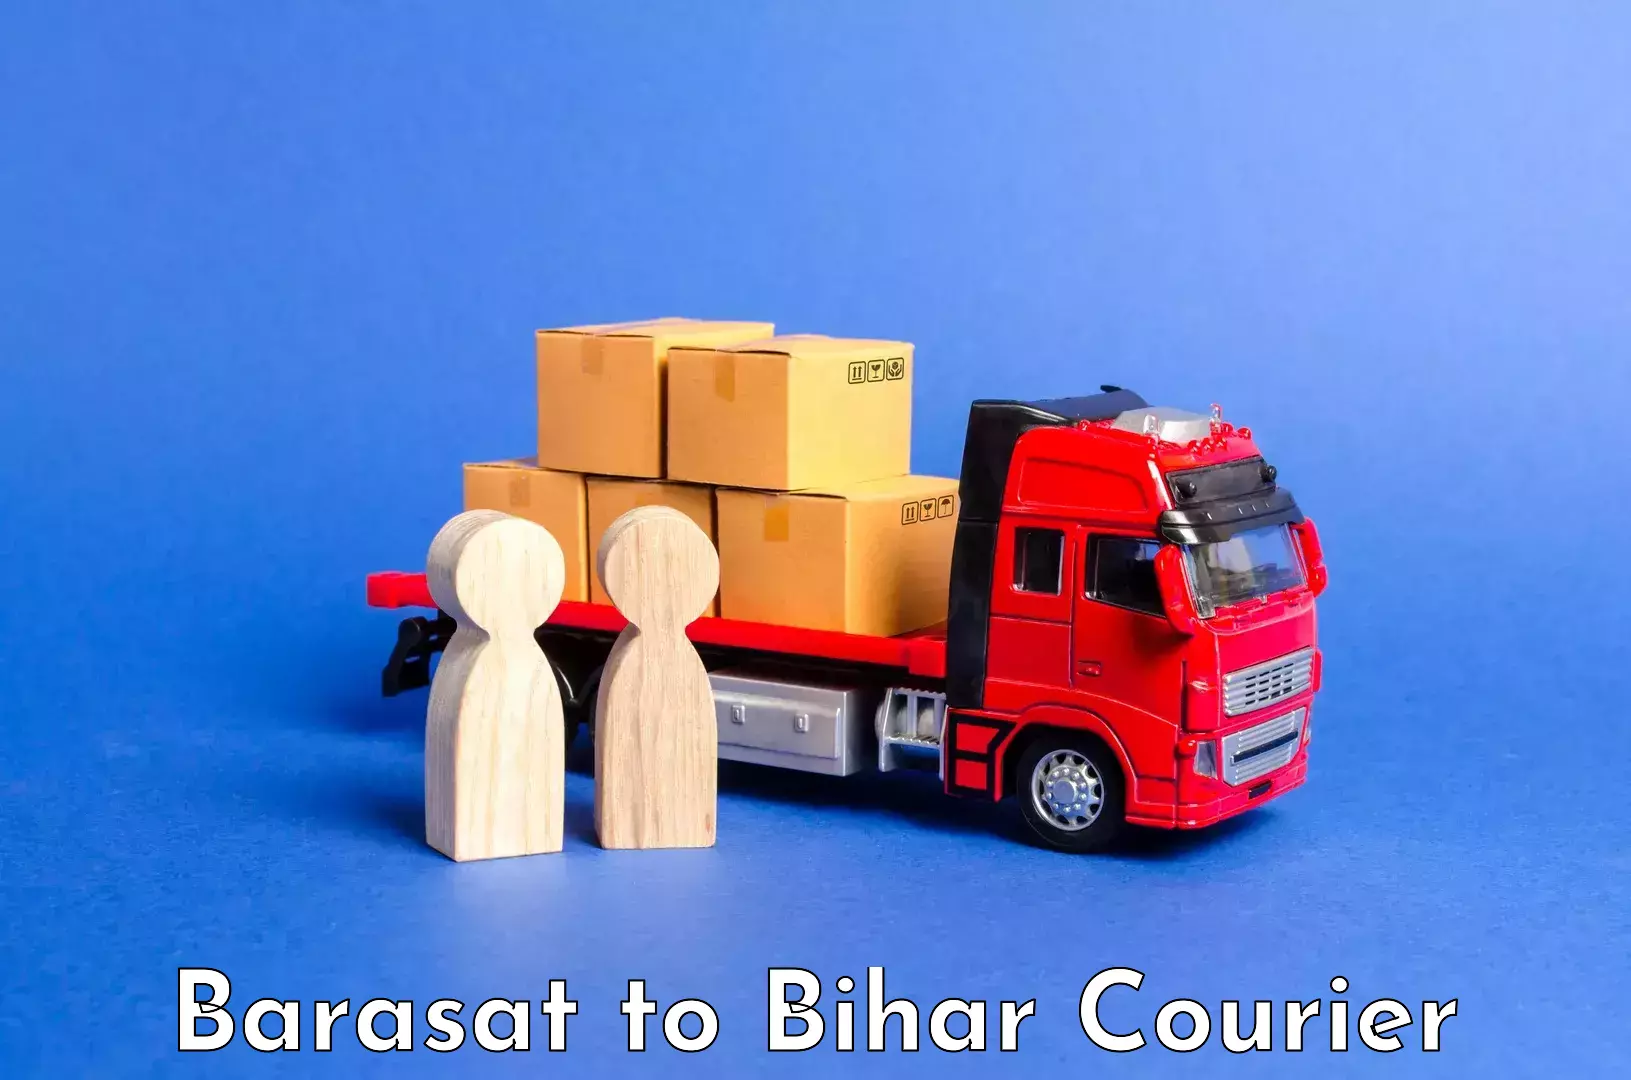 Luggage shipment specialists Barasat to Arrah